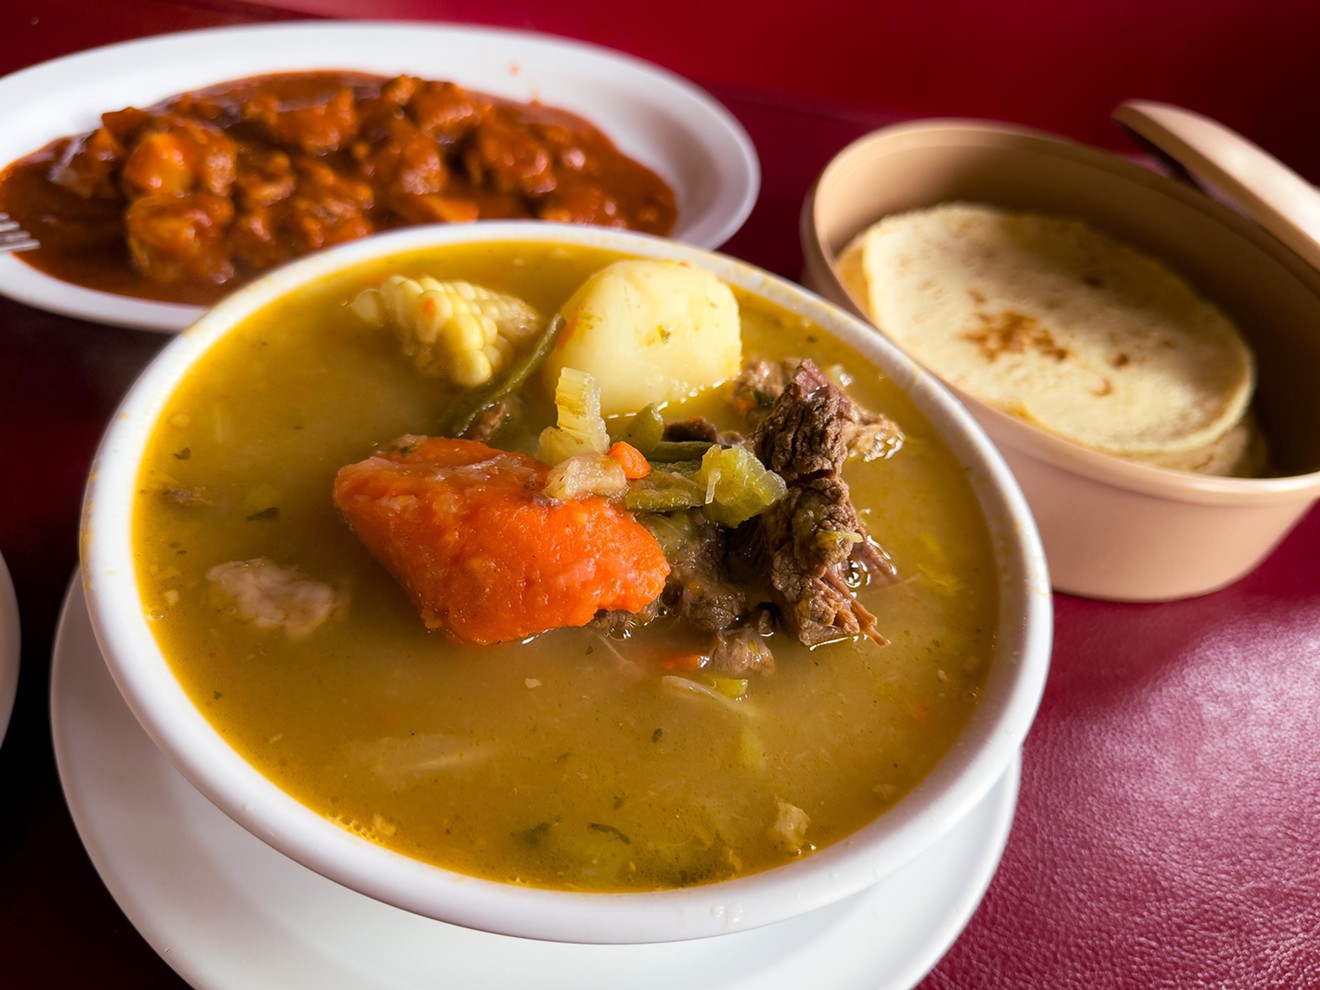 The caldo de res is a standout dish at El Horseshoe, silky and rich and full of flavor.